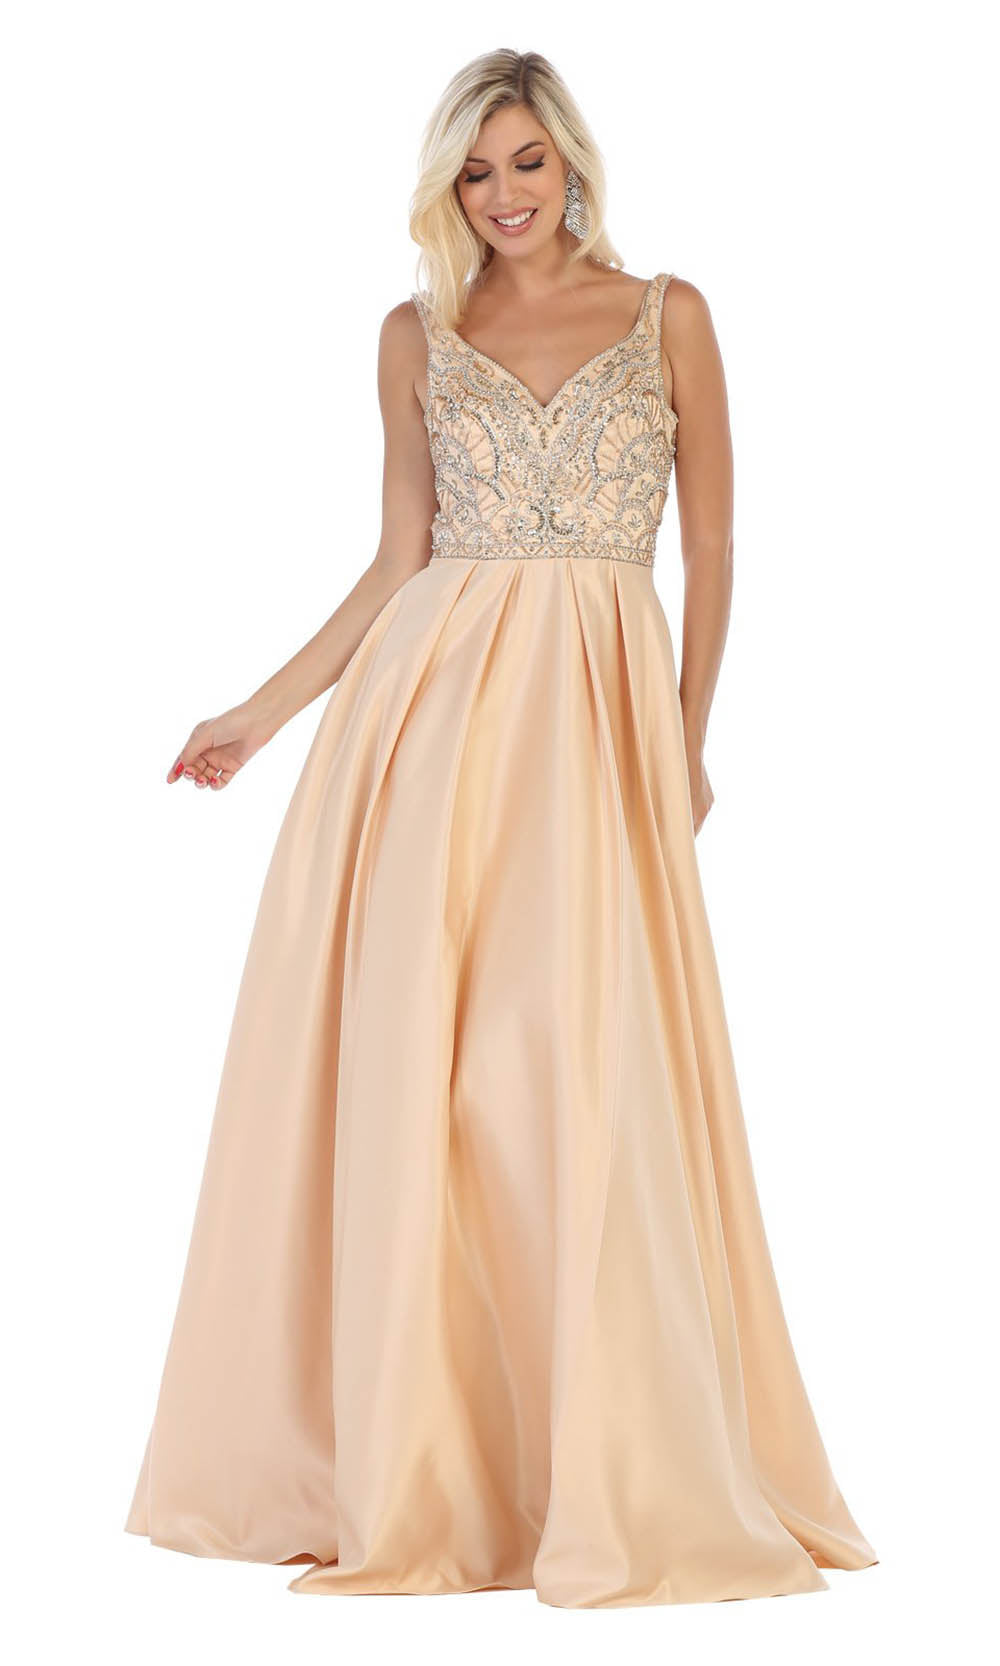 May Queen - MQ1632 Beaded V-Neck A-Line Gown In Champagne